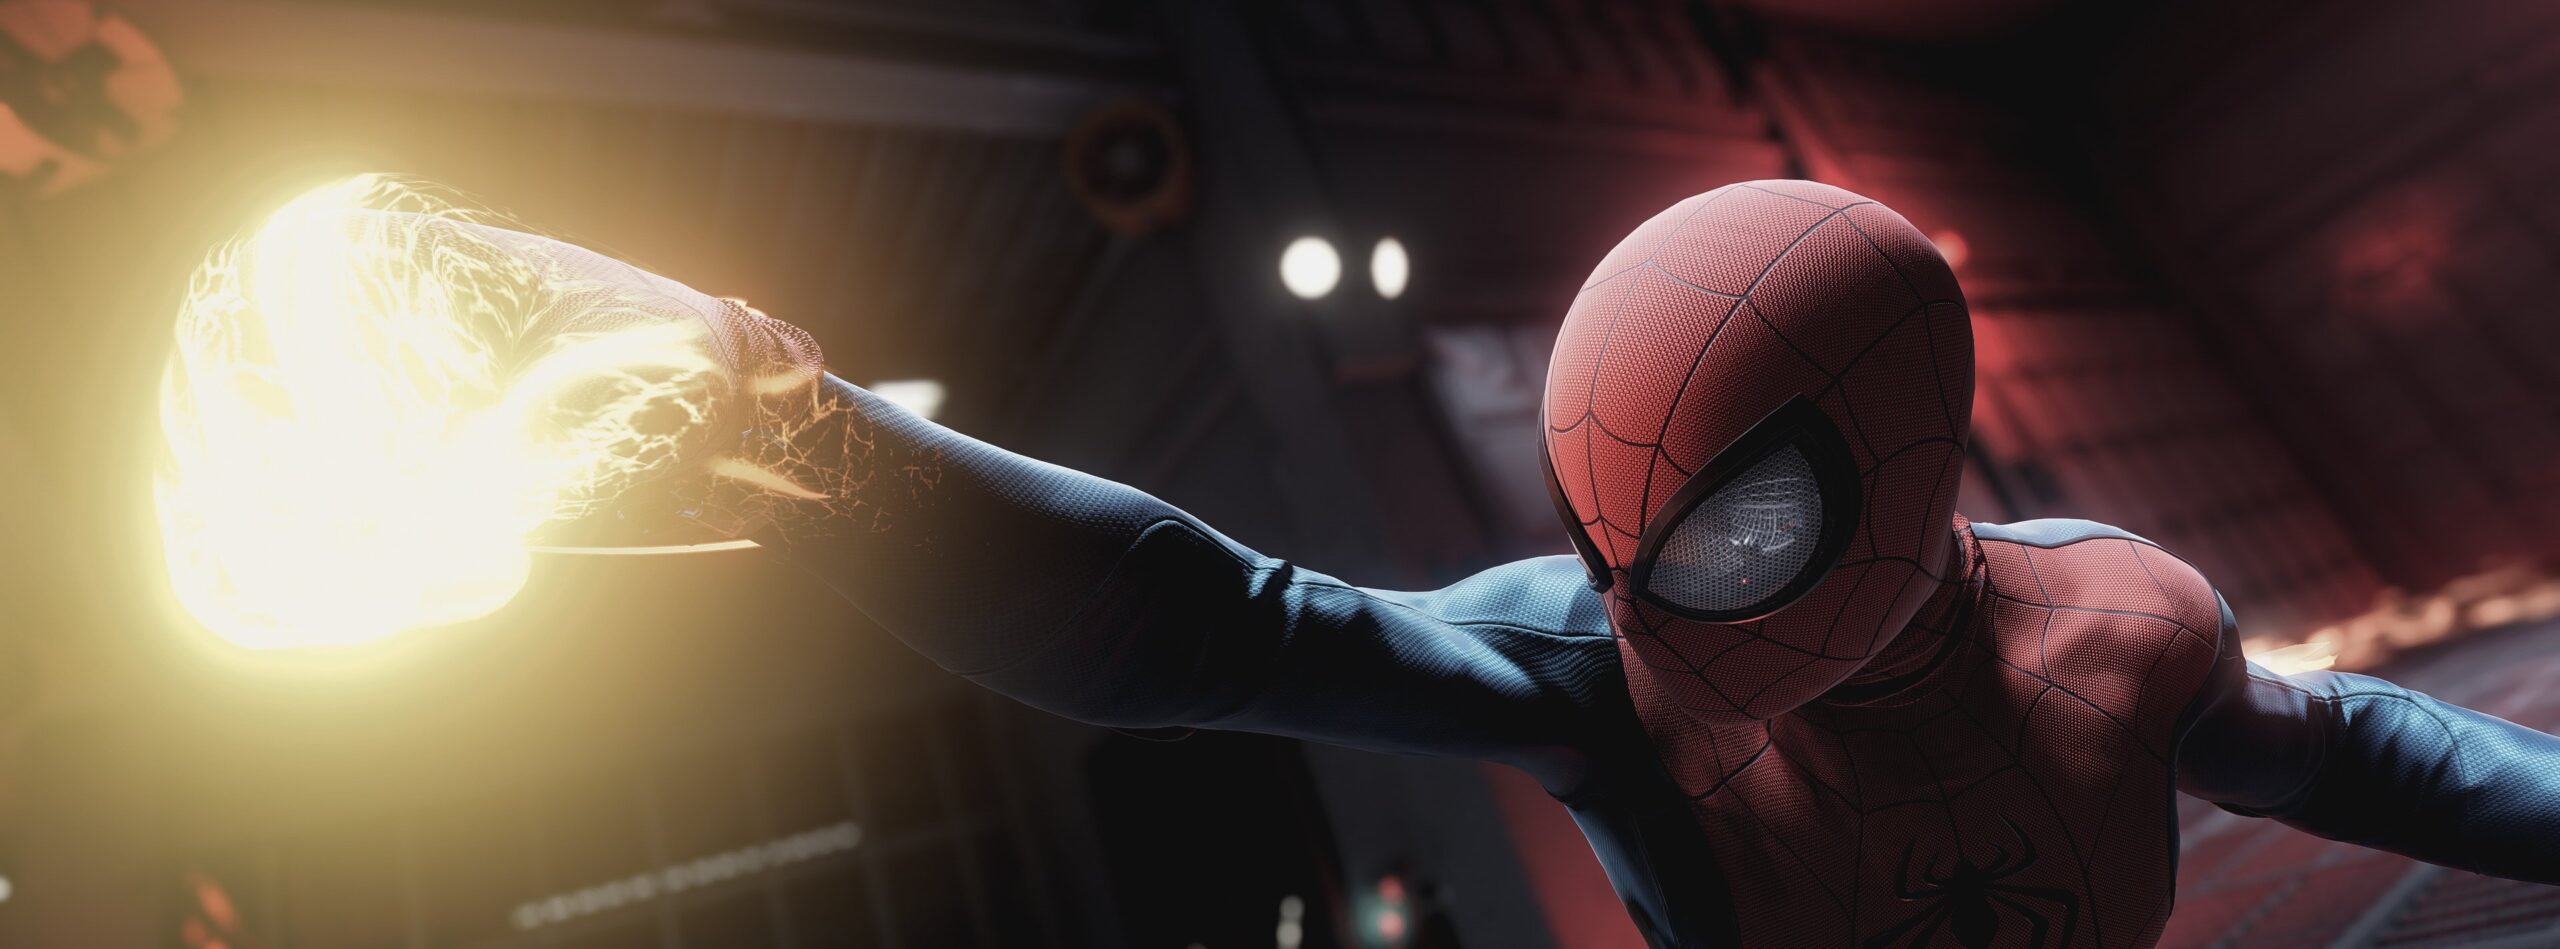 Spider-Man: Miles Morales is well-known for captivating gameplay